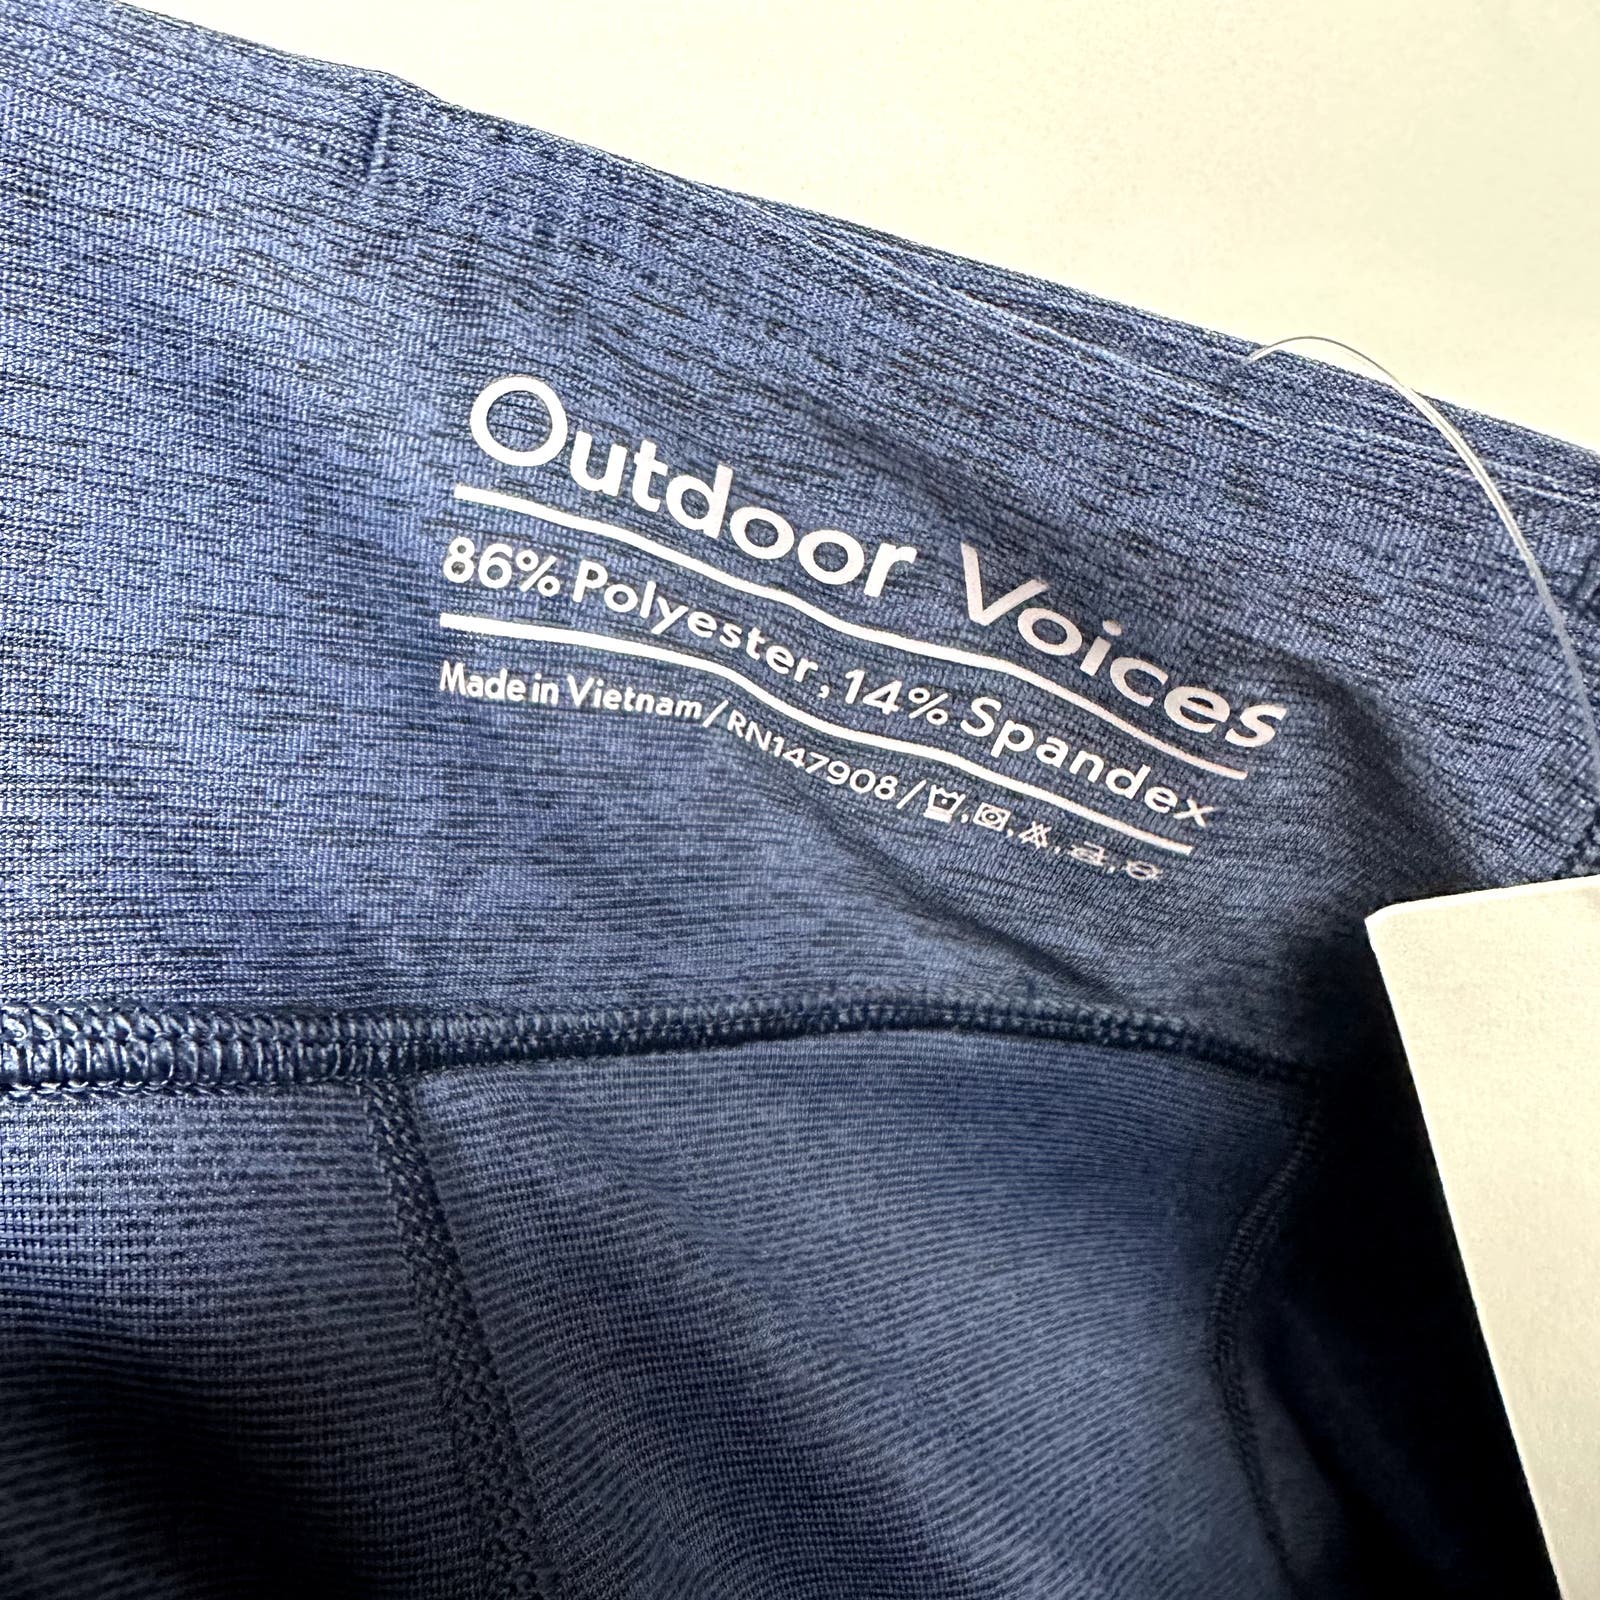 Outdoor Voices NWT Navy Warmup 7/8 Legging Size XS